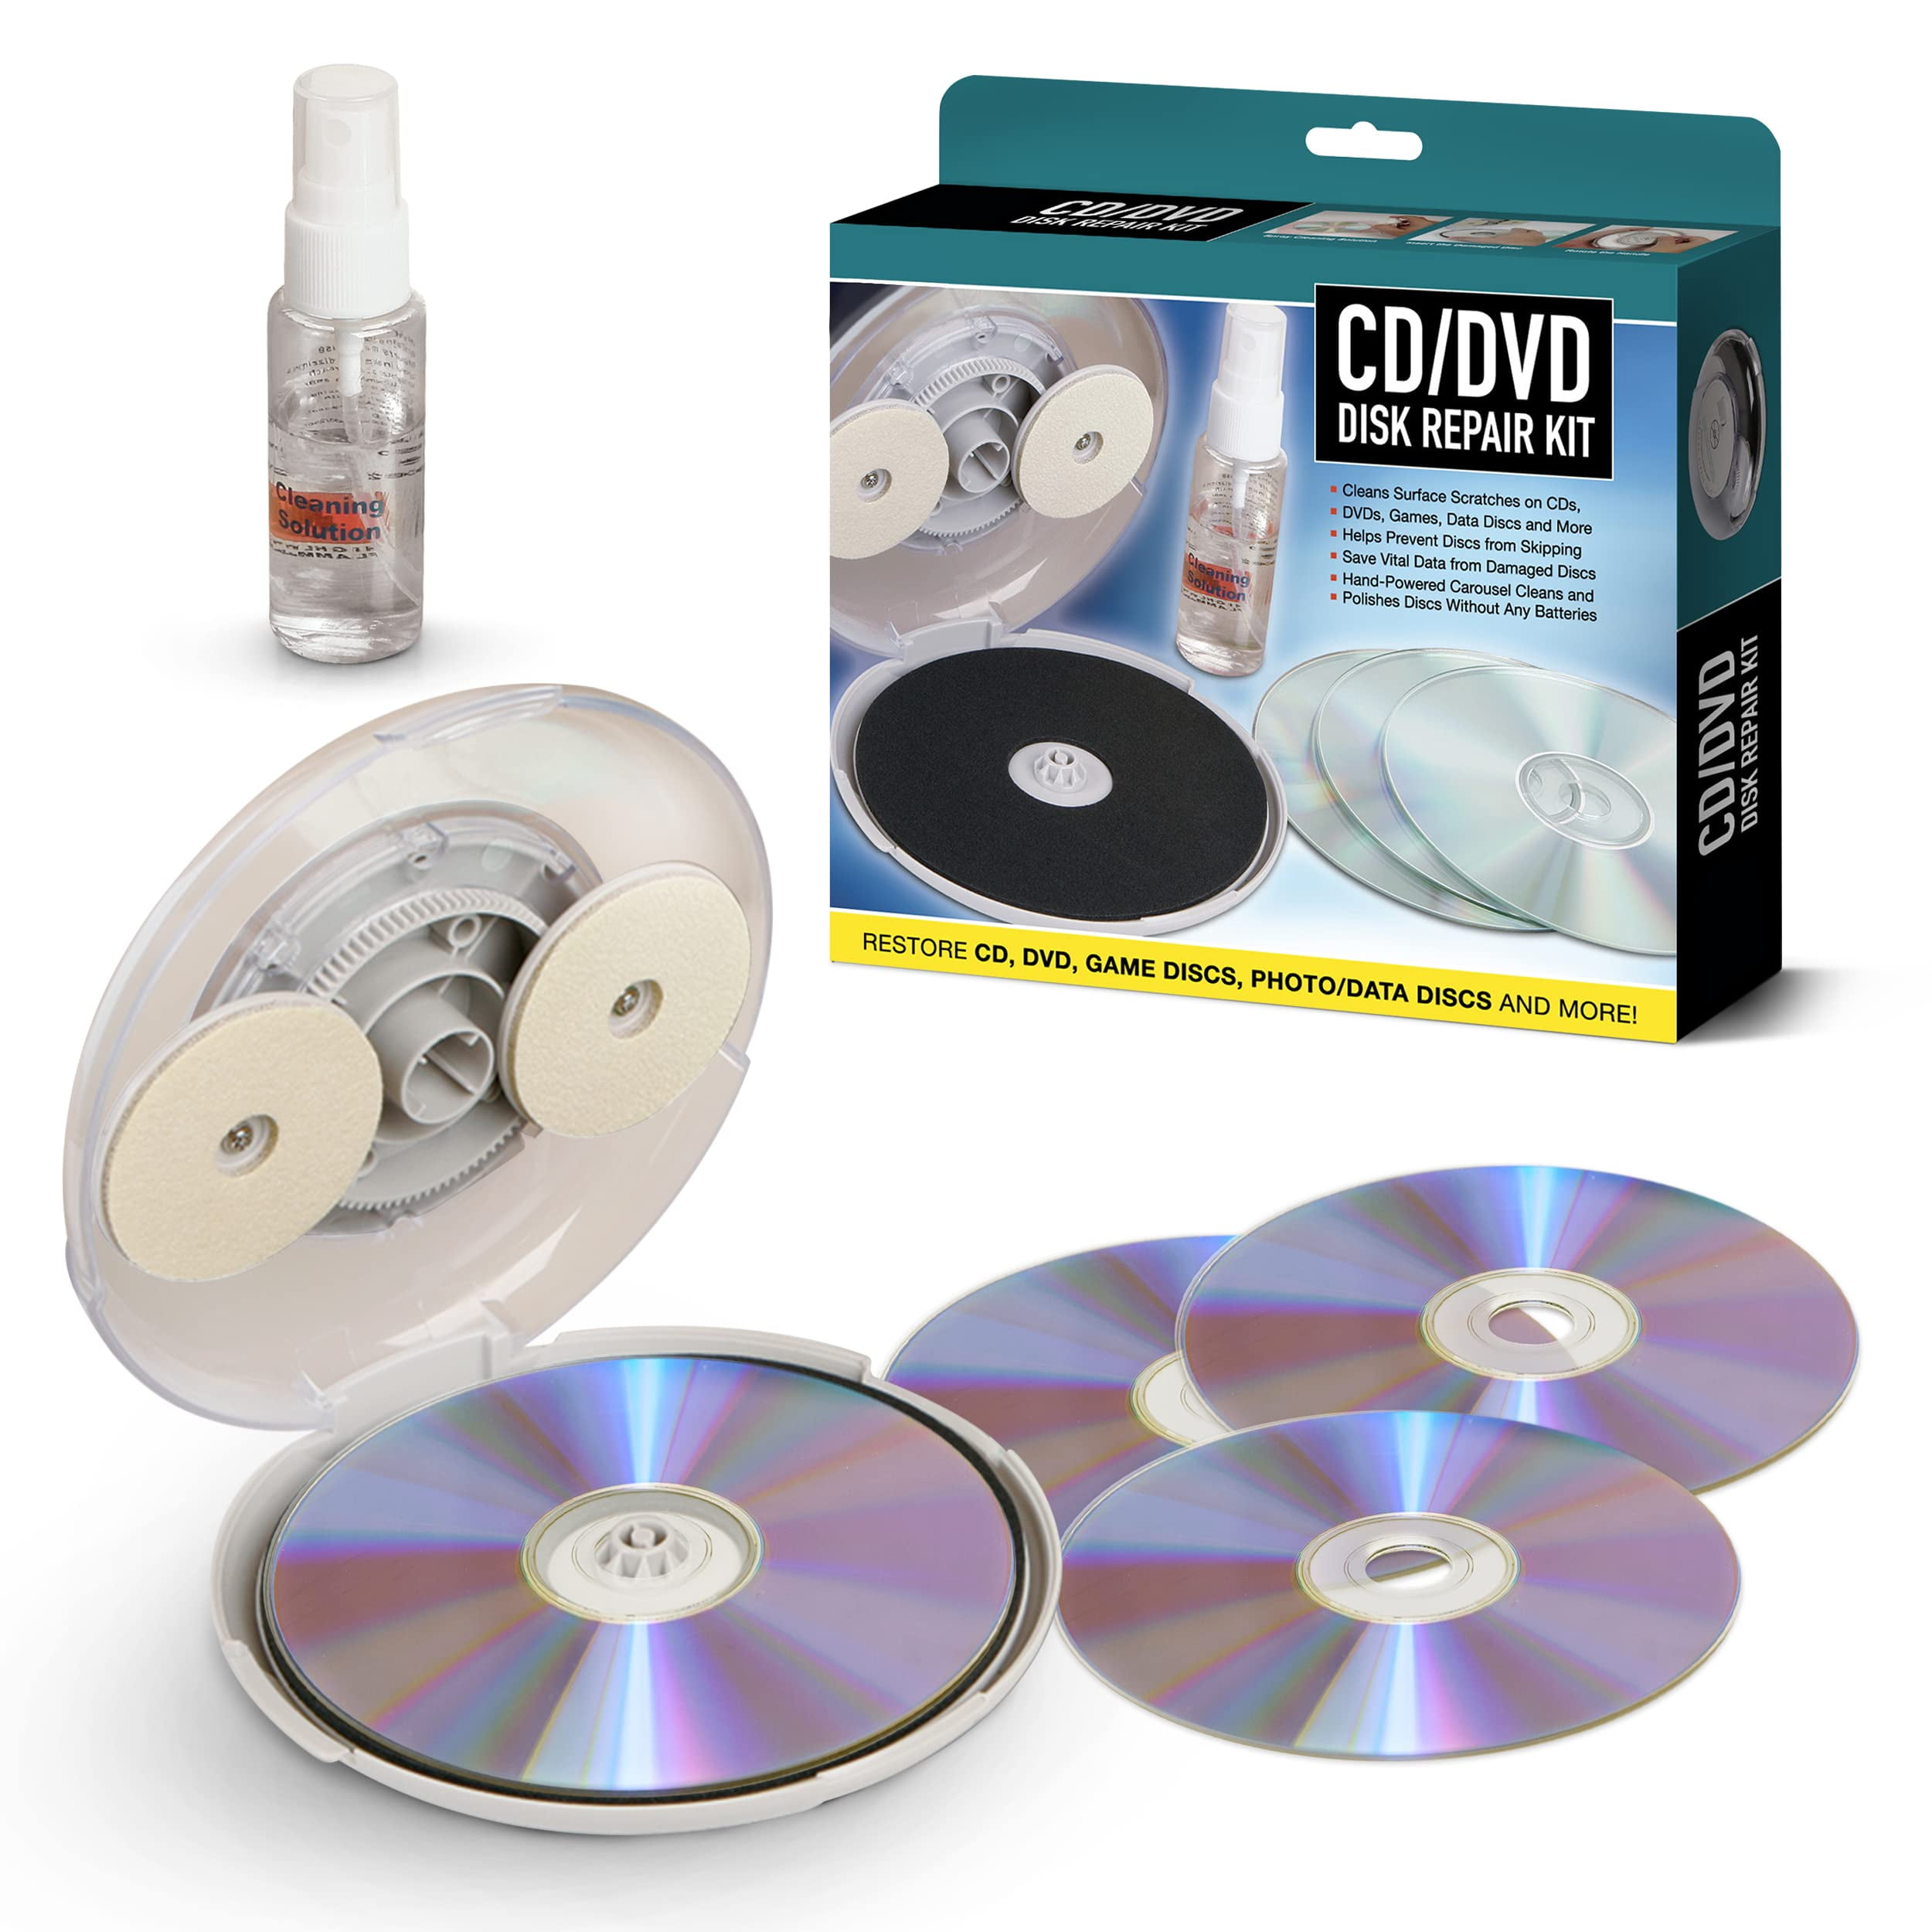 DVD CD Repair Kit with Cleaning Solution Included - Hand Powered